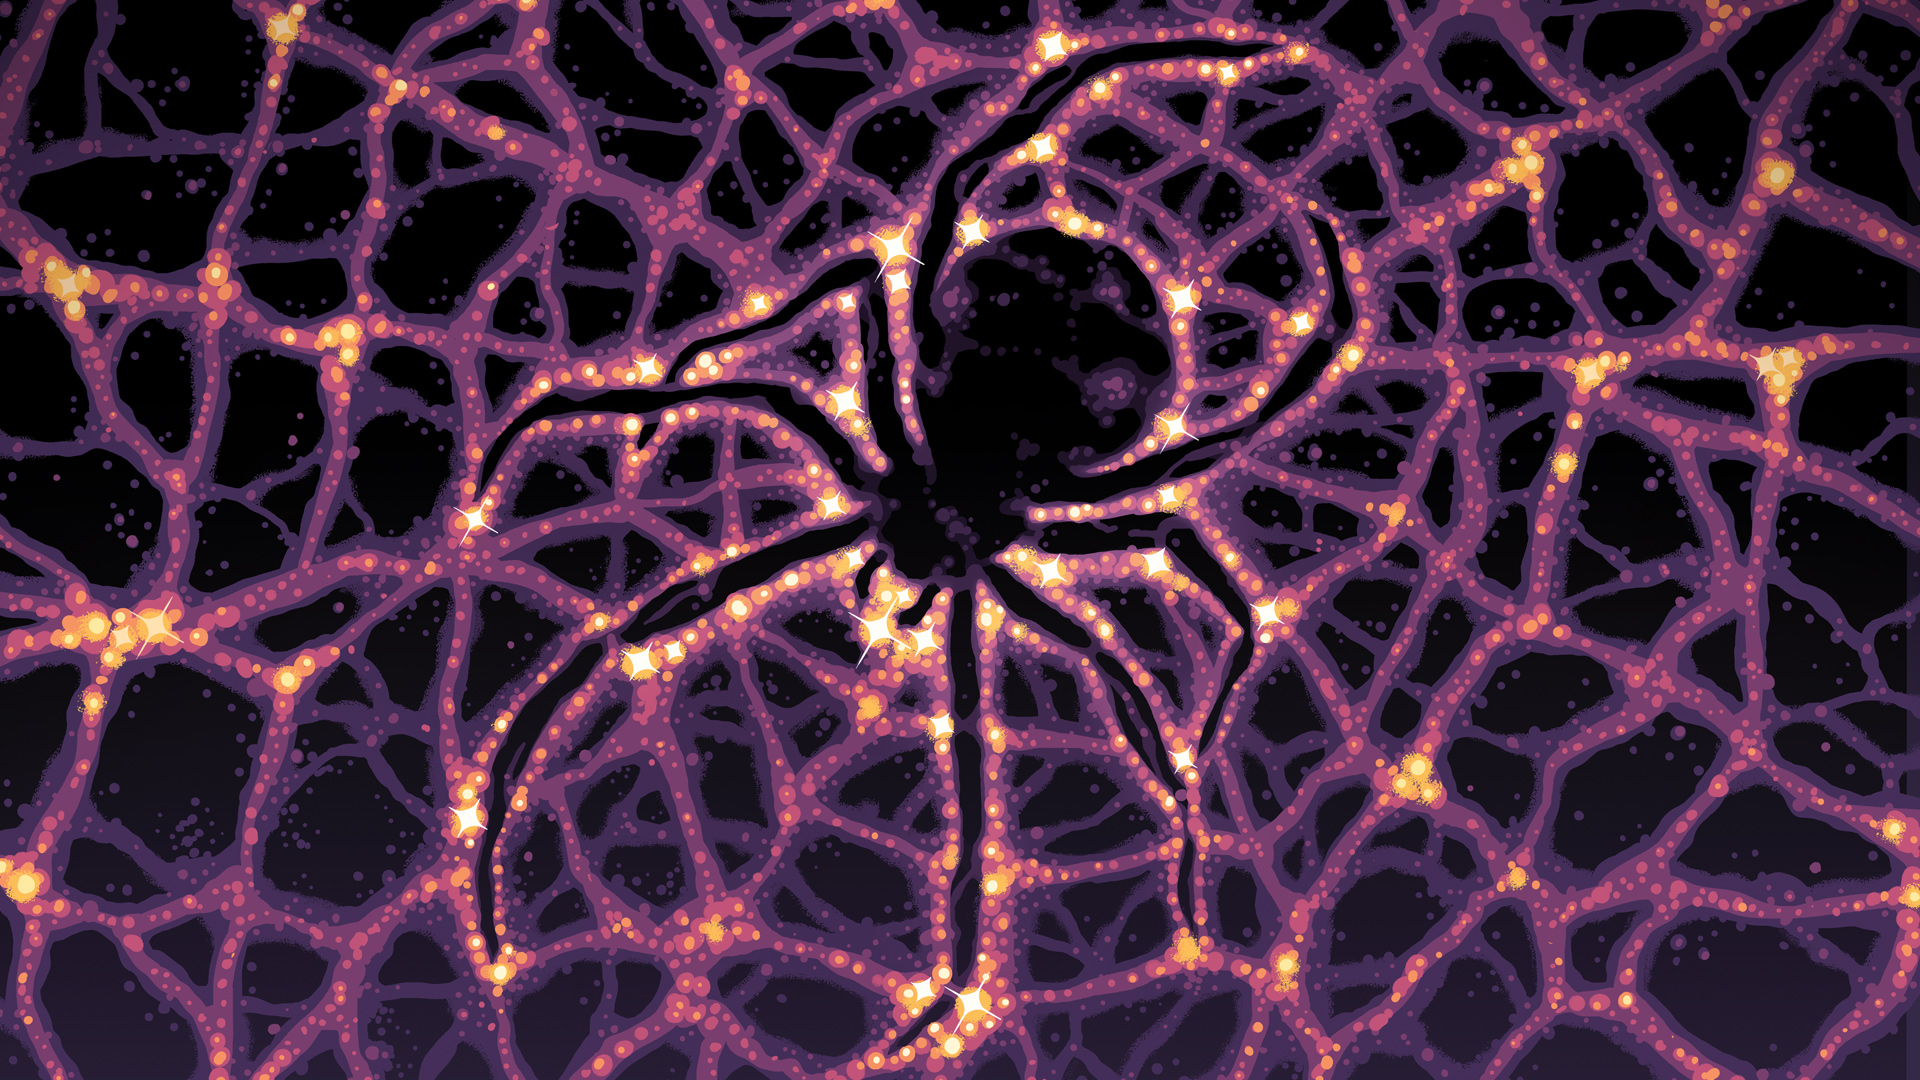 A scary illustration of a giant spider in a web of dark matter.